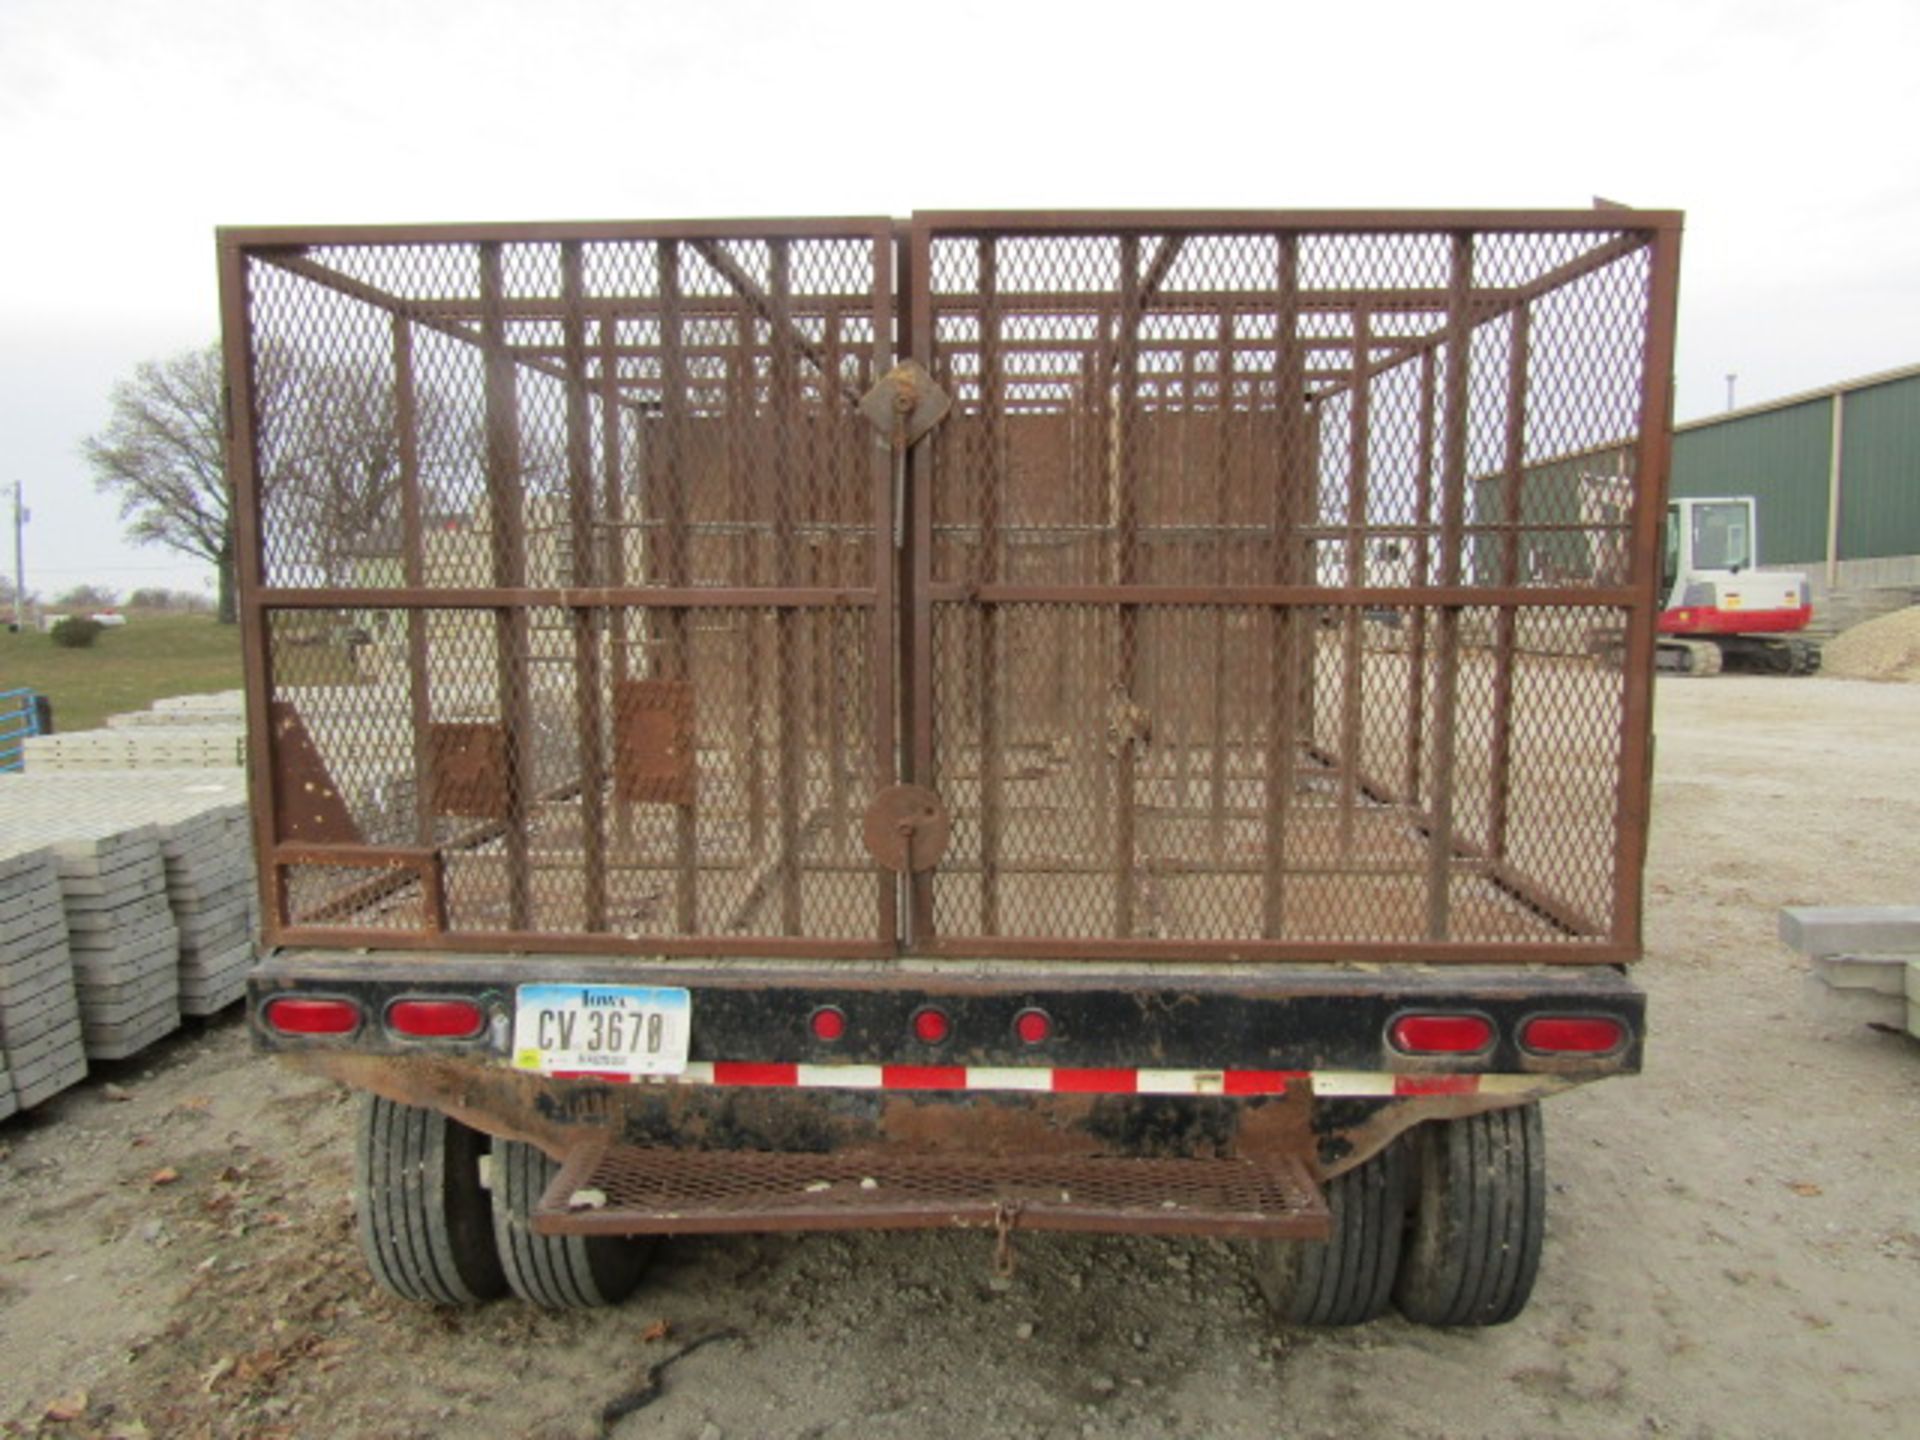 2004 B-B Gooseneck Trailer, Tandem Axle, 18' 8" x 9' 6" Well, 8' 7" Top Deck, Located in - Image 9 of 9